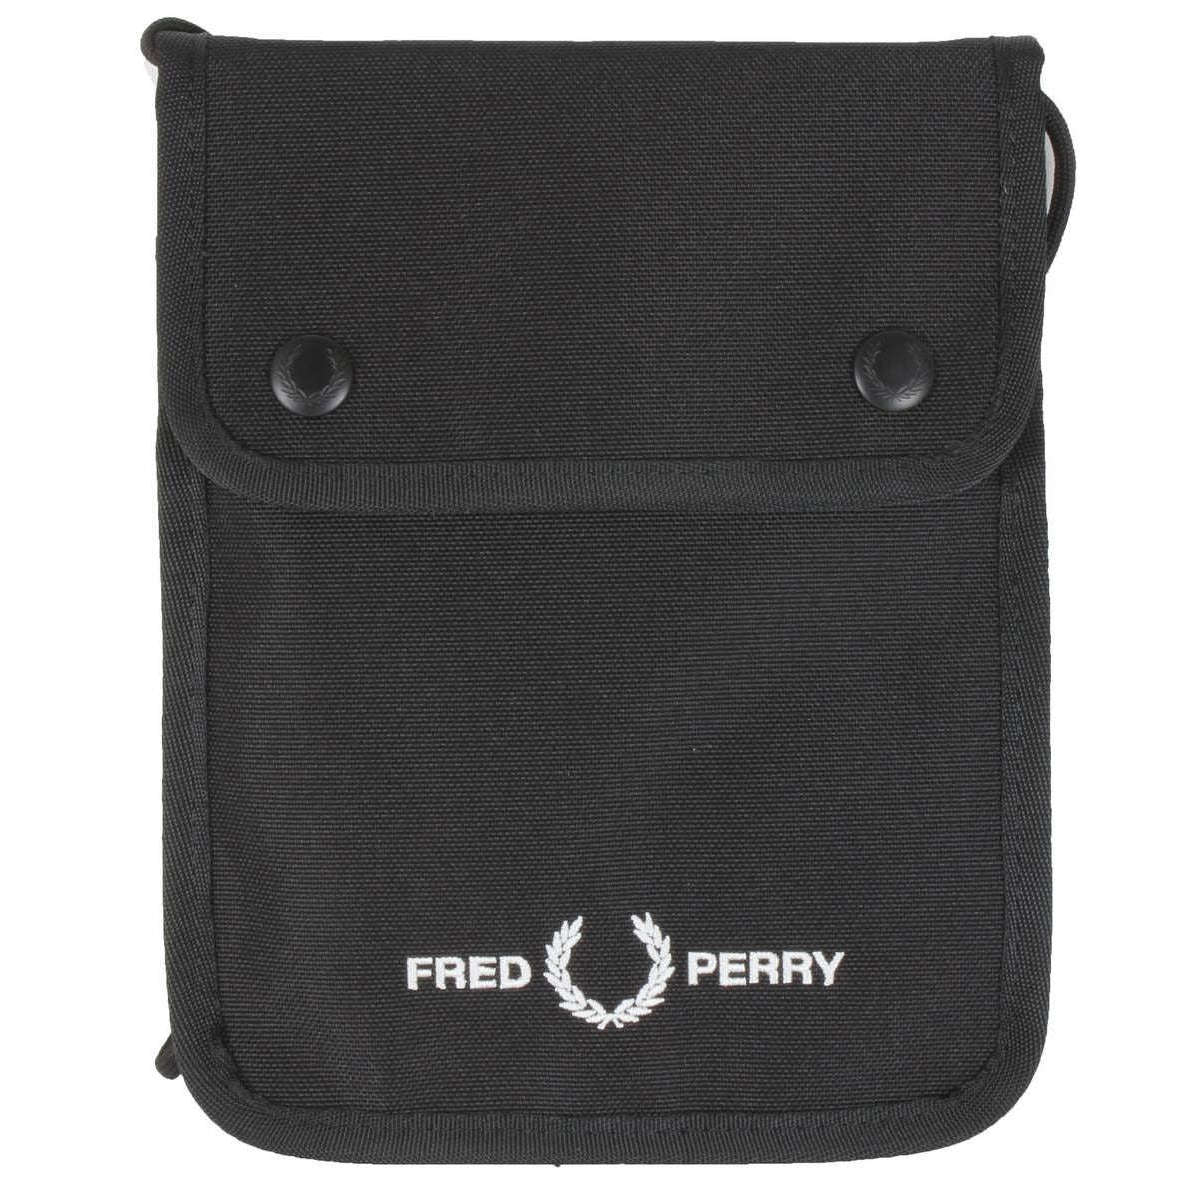 Fred Perry Branded Pouch - Black